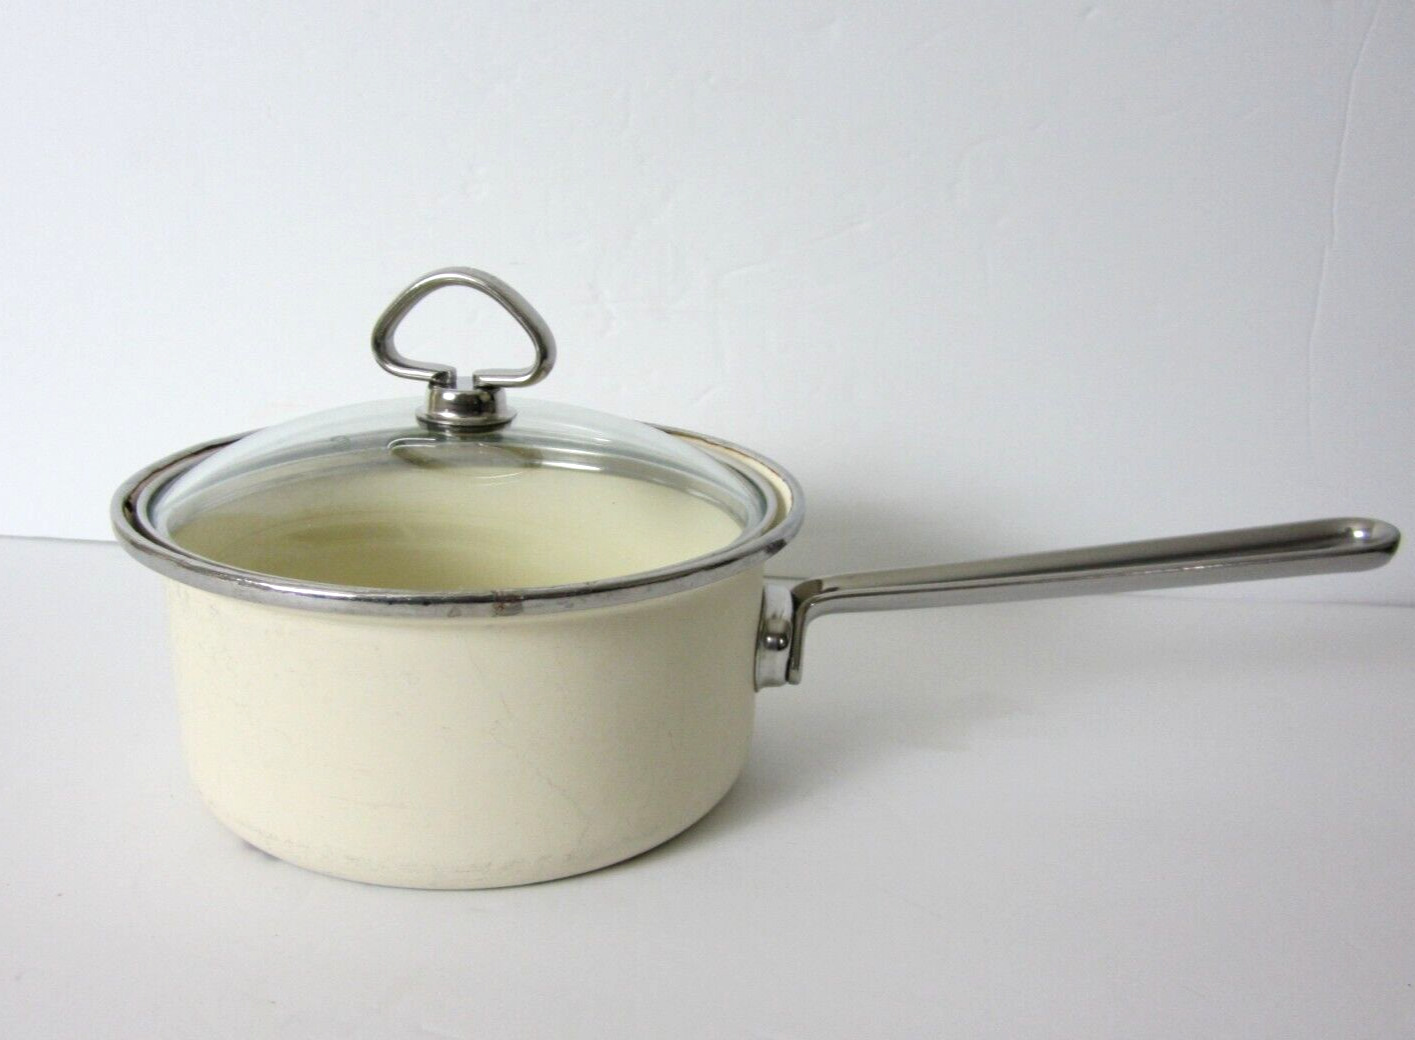 Vintage Chantal Soft White Enamel Sauce Pan Pot With Lid And Handle SEE DEFECTS